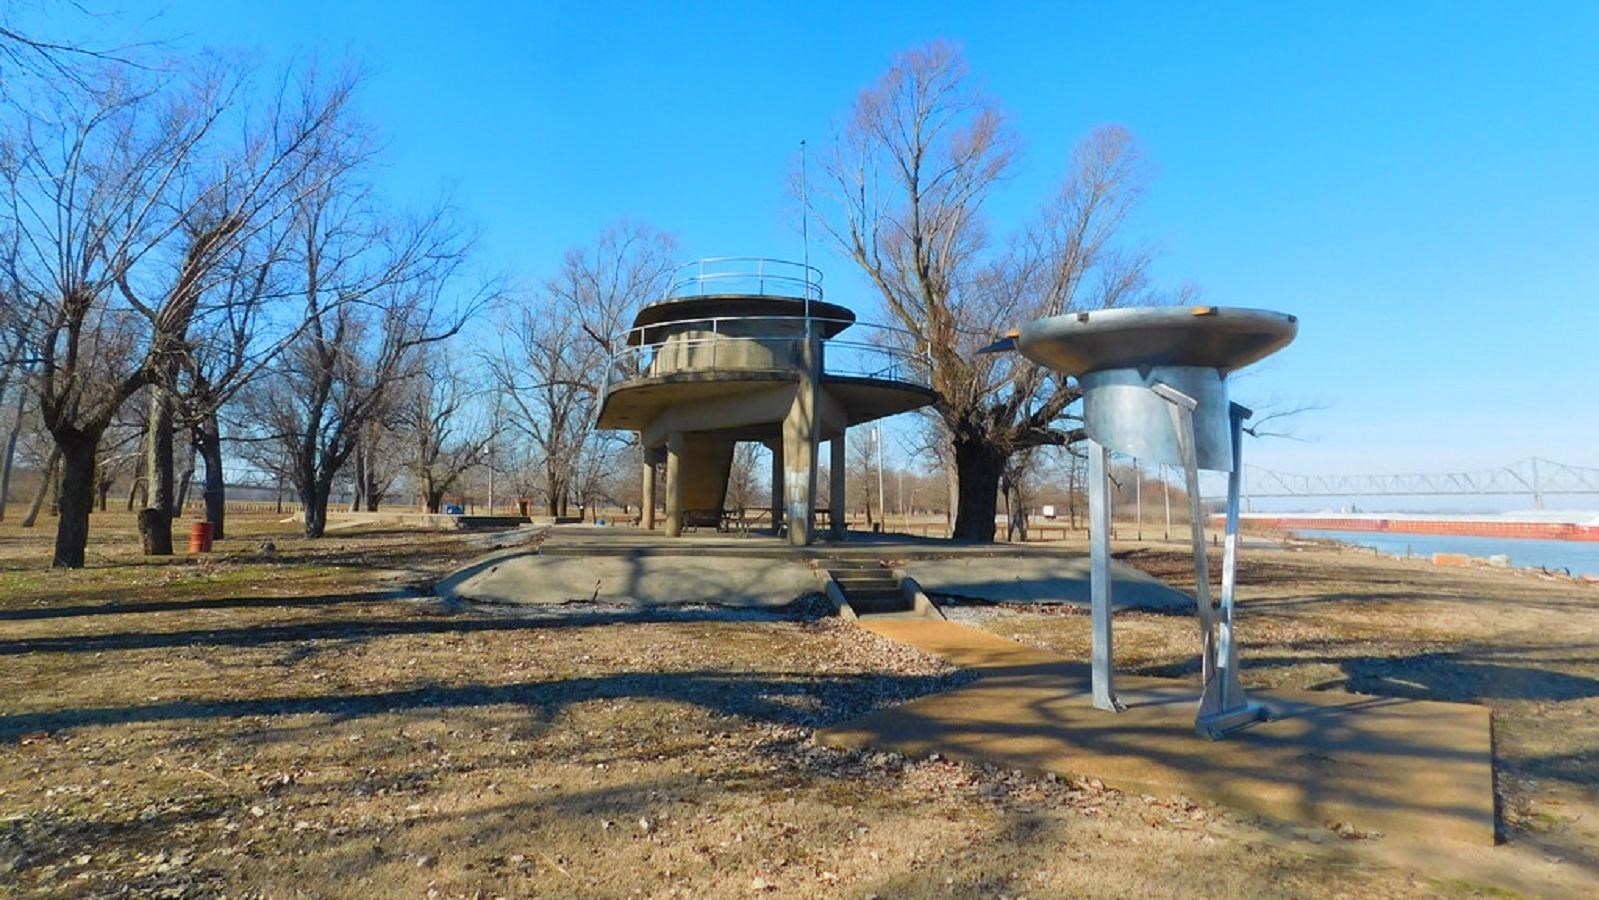 A tall stone observation station and metal sculpture stand along a lake shore